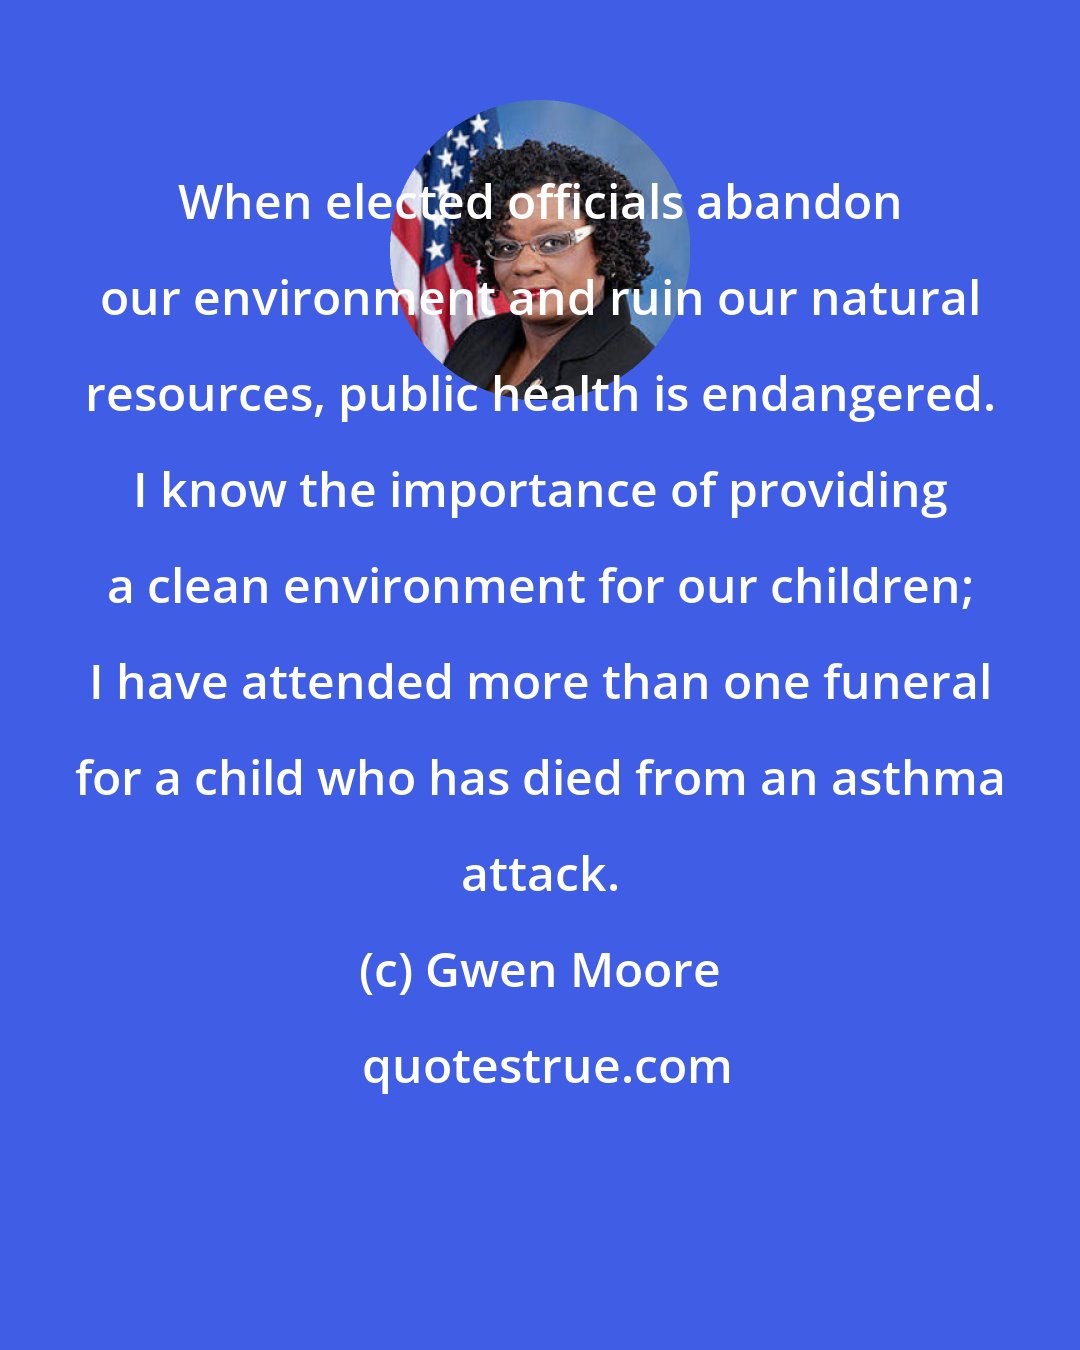 Gwen Moore: When elected officials abandon our environment and ruin our natural resources, public health is endangered. I know the importance of providing a clean environment for our children; I have attended more than one funeral for a child who has died from an asthma attack.